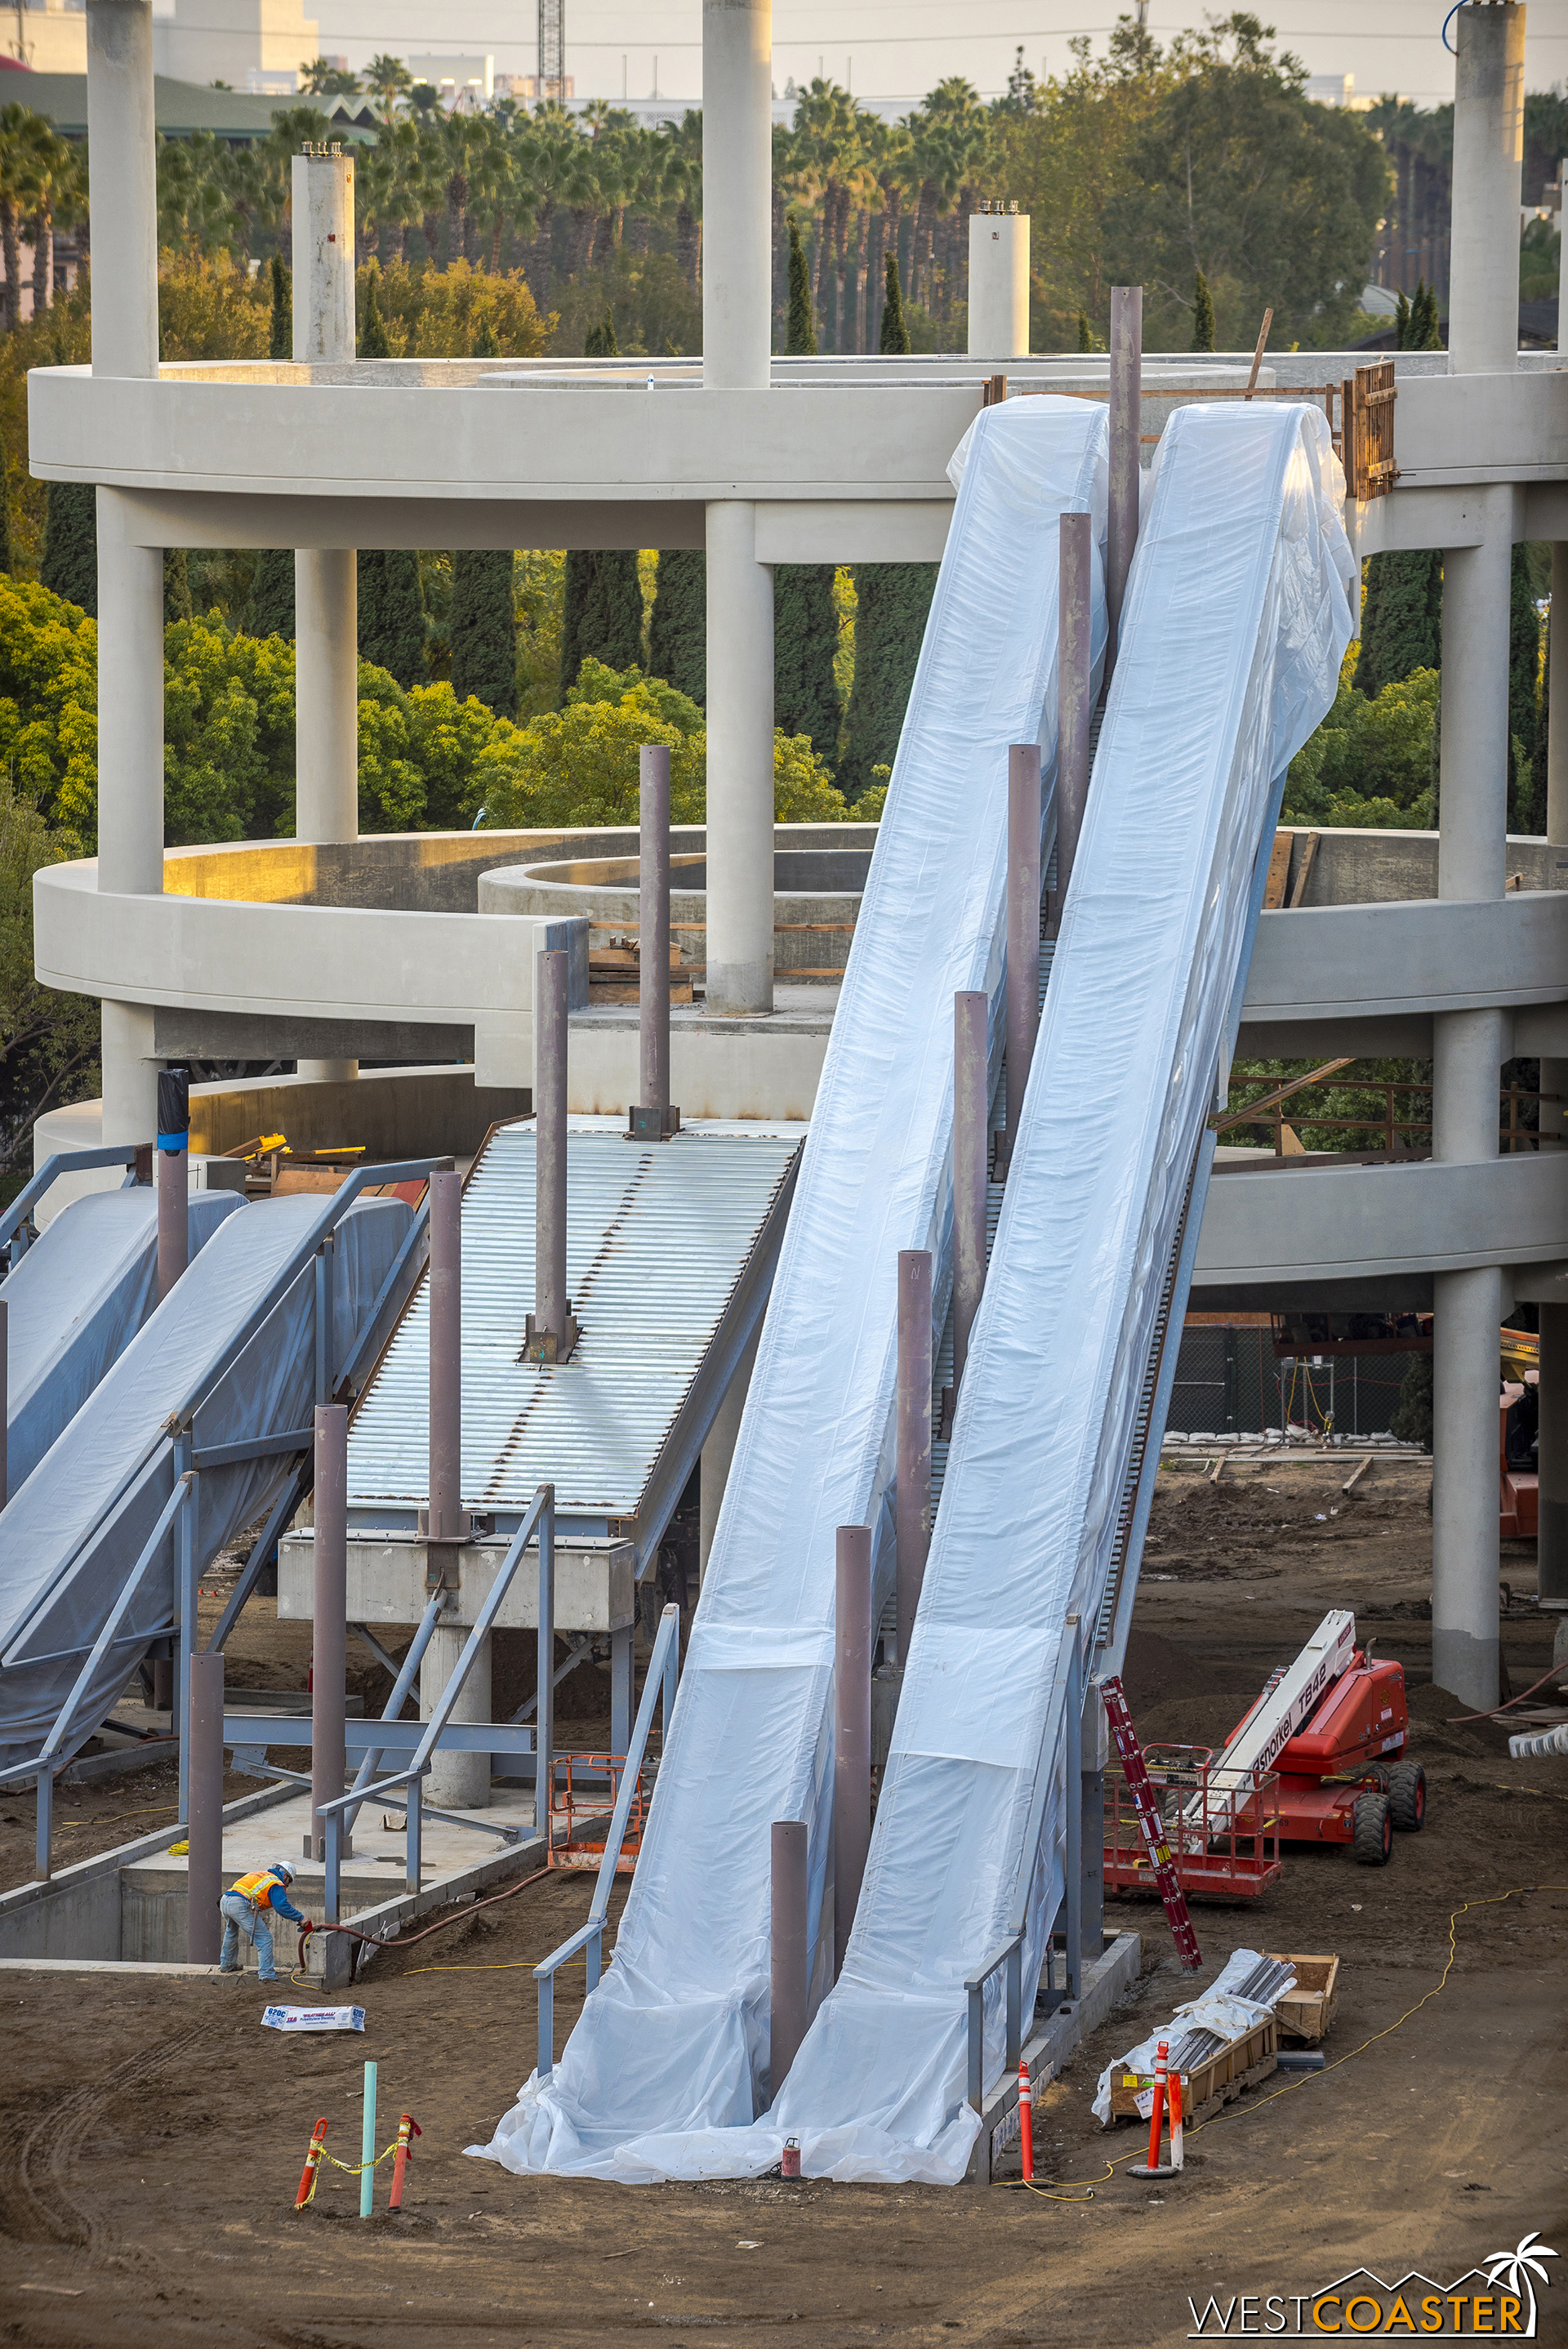  The escalators up to the fifth floor have been installed!  But they remain covered to protect against the weather. 